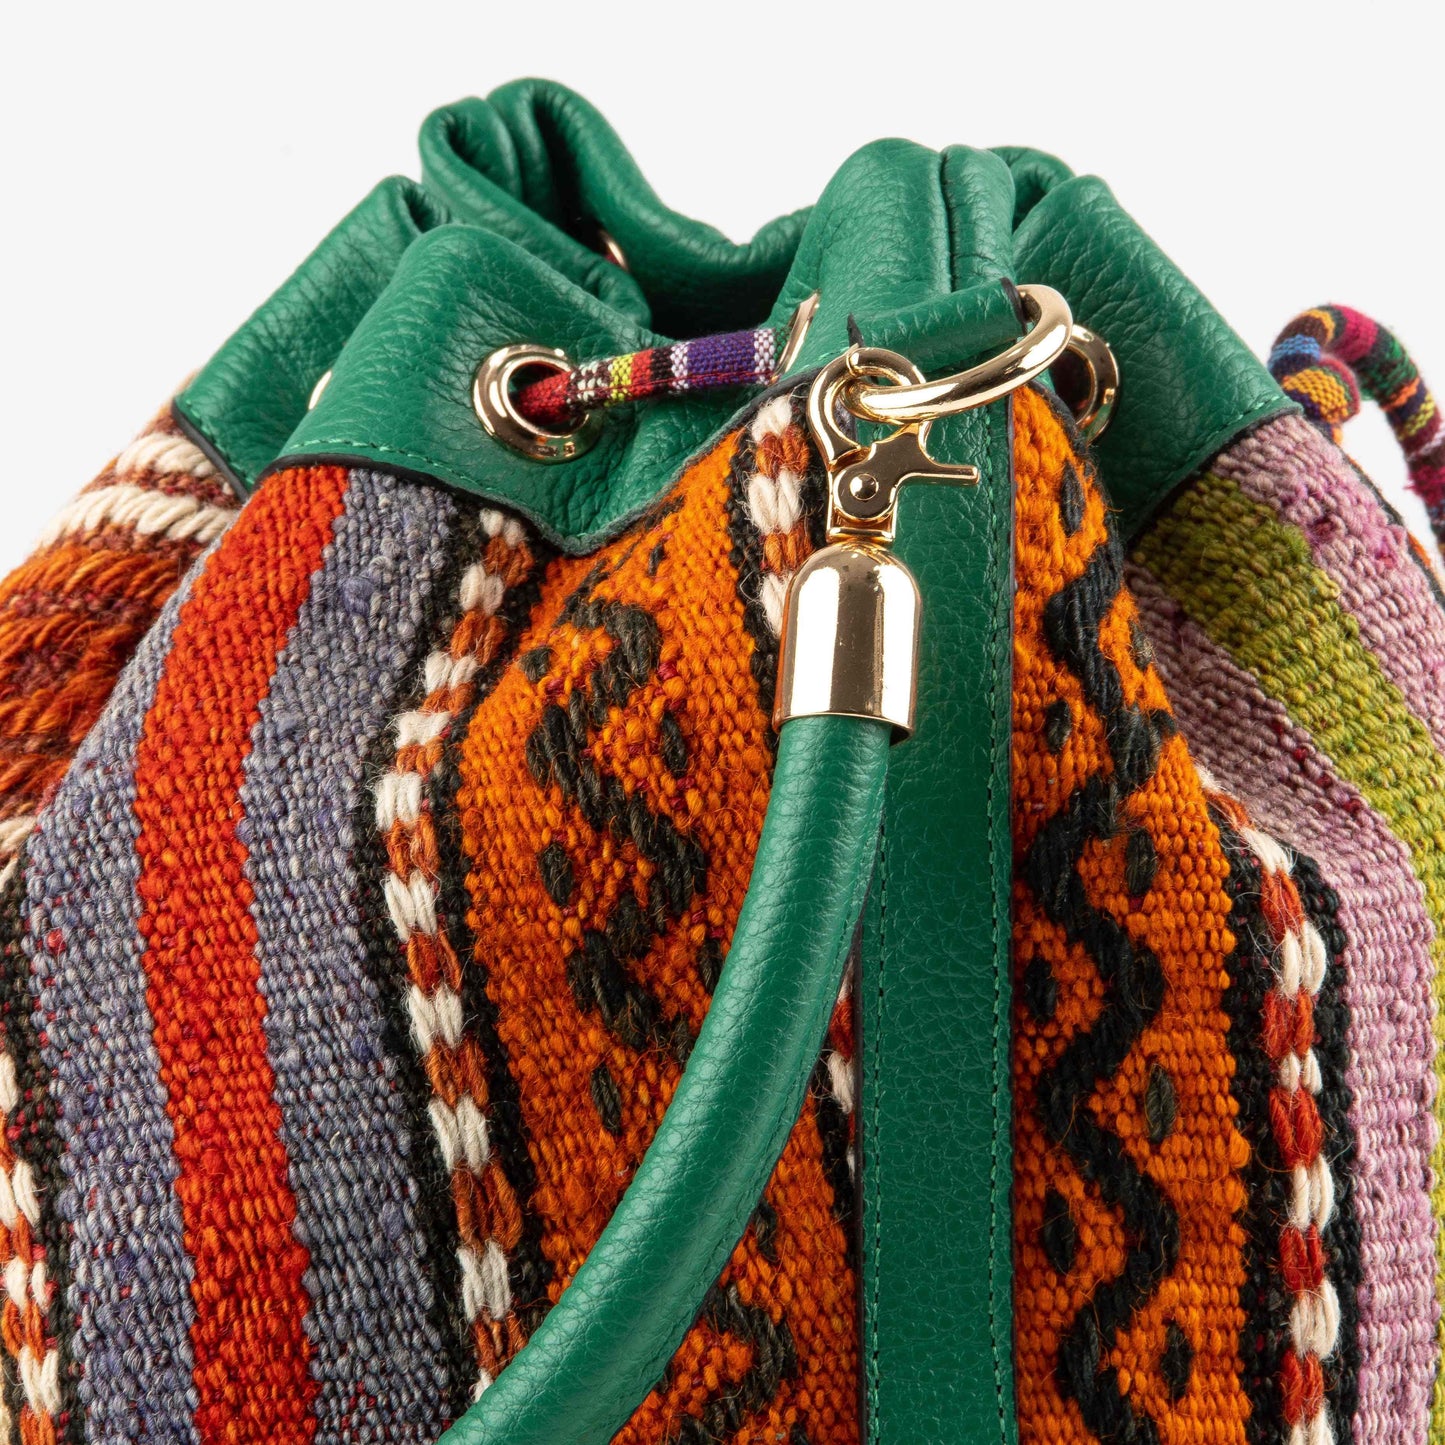 Handmade Kilim Real Leather Unique Drawstring Bag Leather Strap Zipper Closure Lined